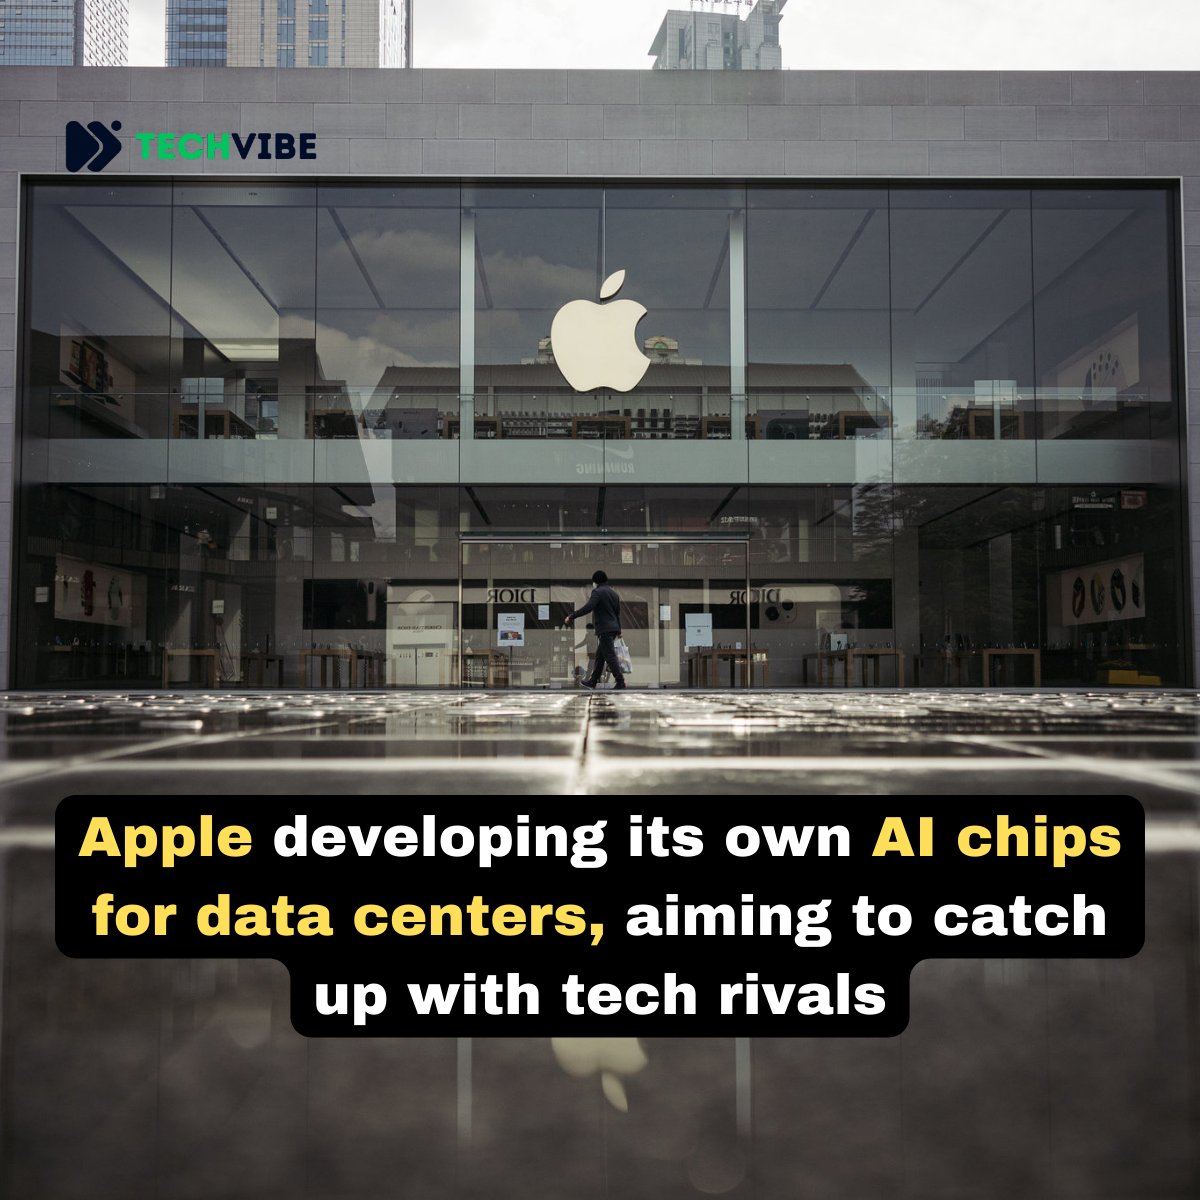 Apple forges ahead with AI-centric chips for data centers, intensifying competition in the tech sphere. more: t.ly/VftFI #Apple #AIChips #AI #AInews